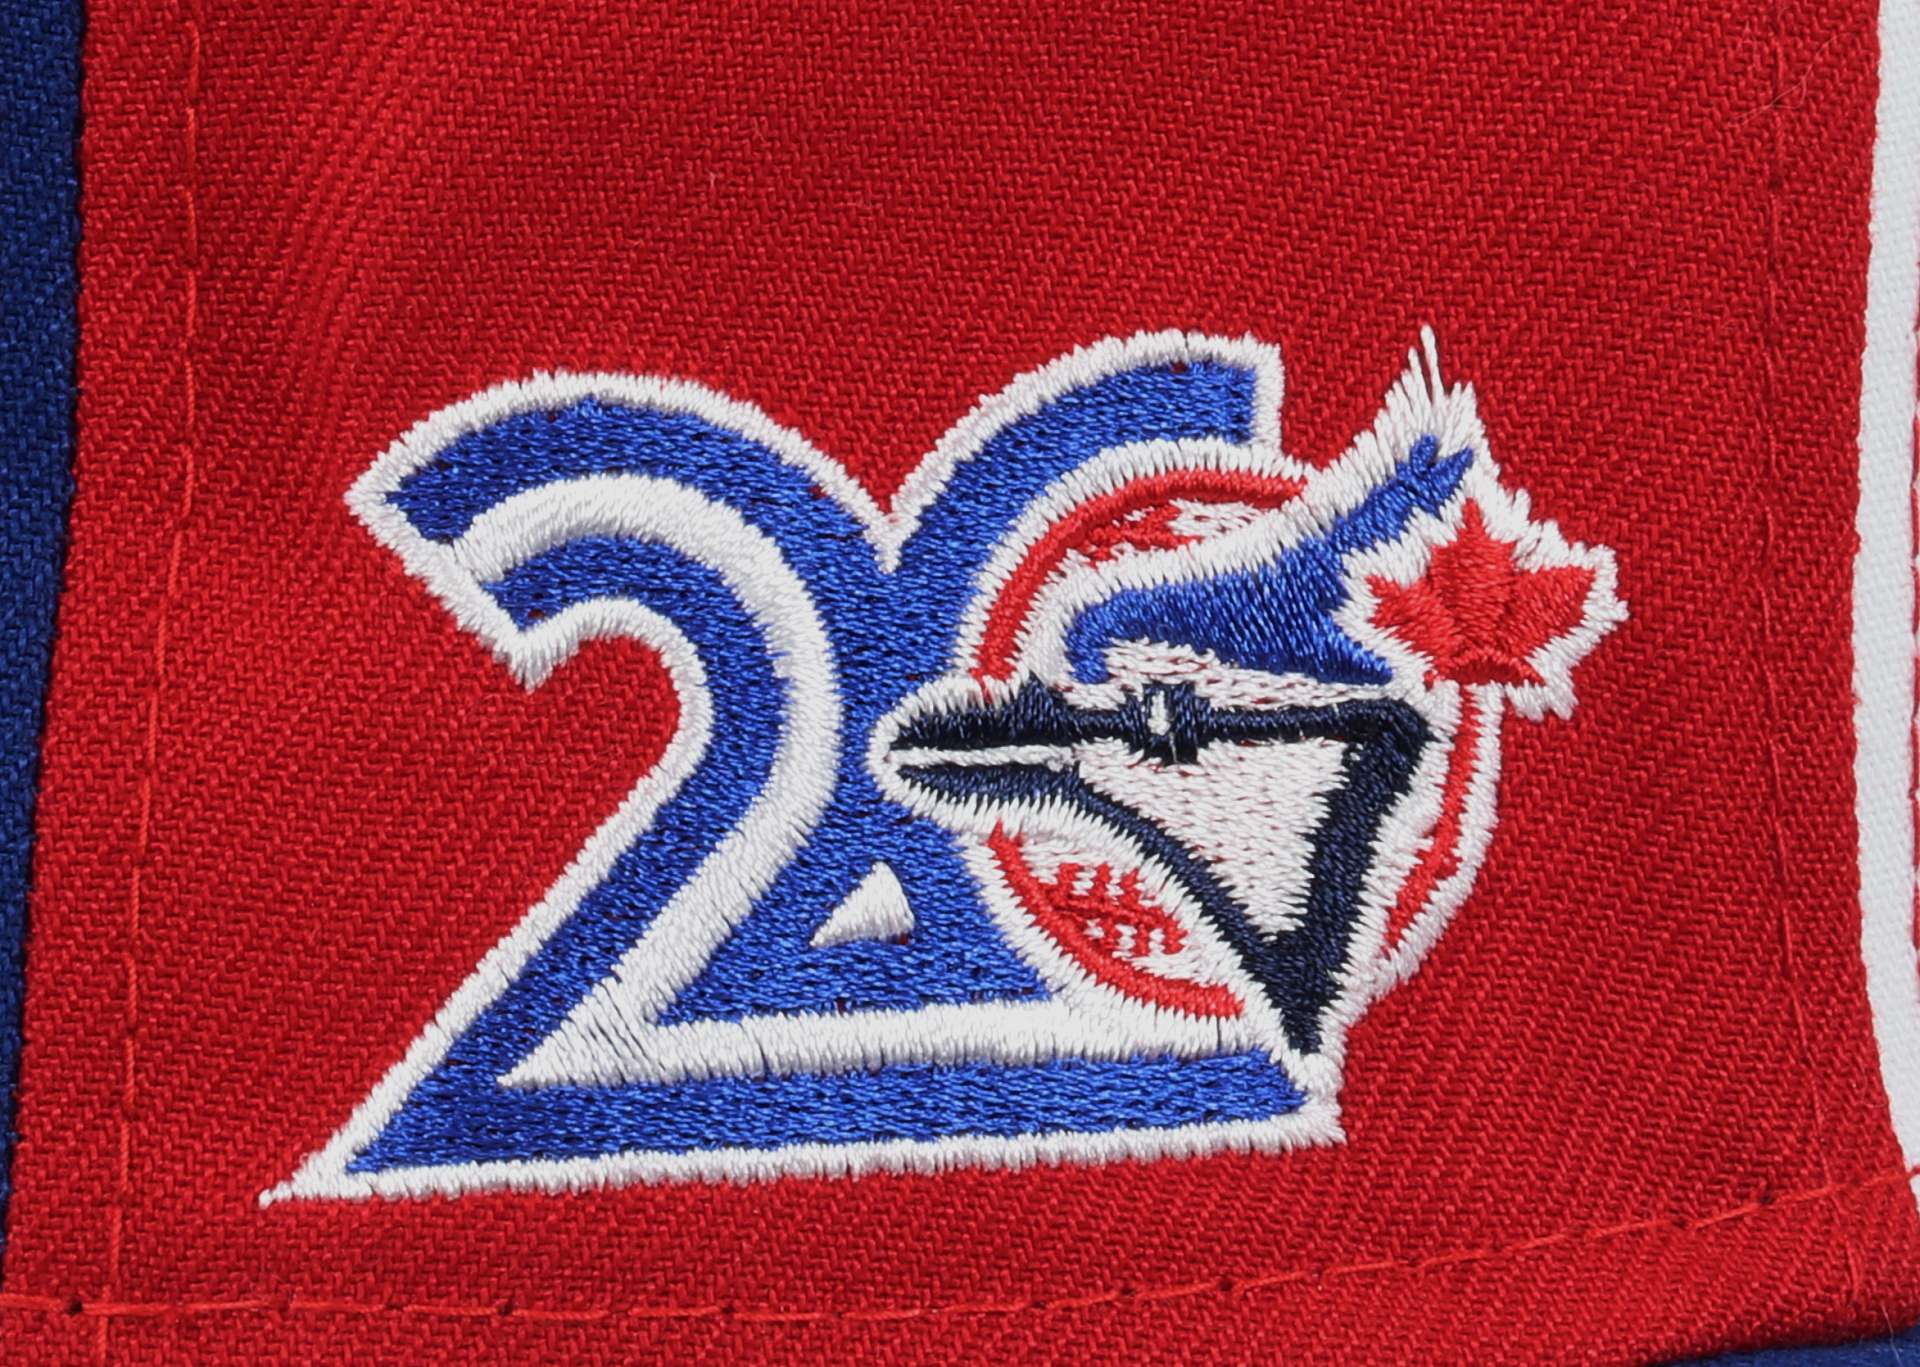 Toronto Blue Jays MLB Cooperstown 20th Anniversary Sidepatch White Royal 59Fifty Basecap New Era